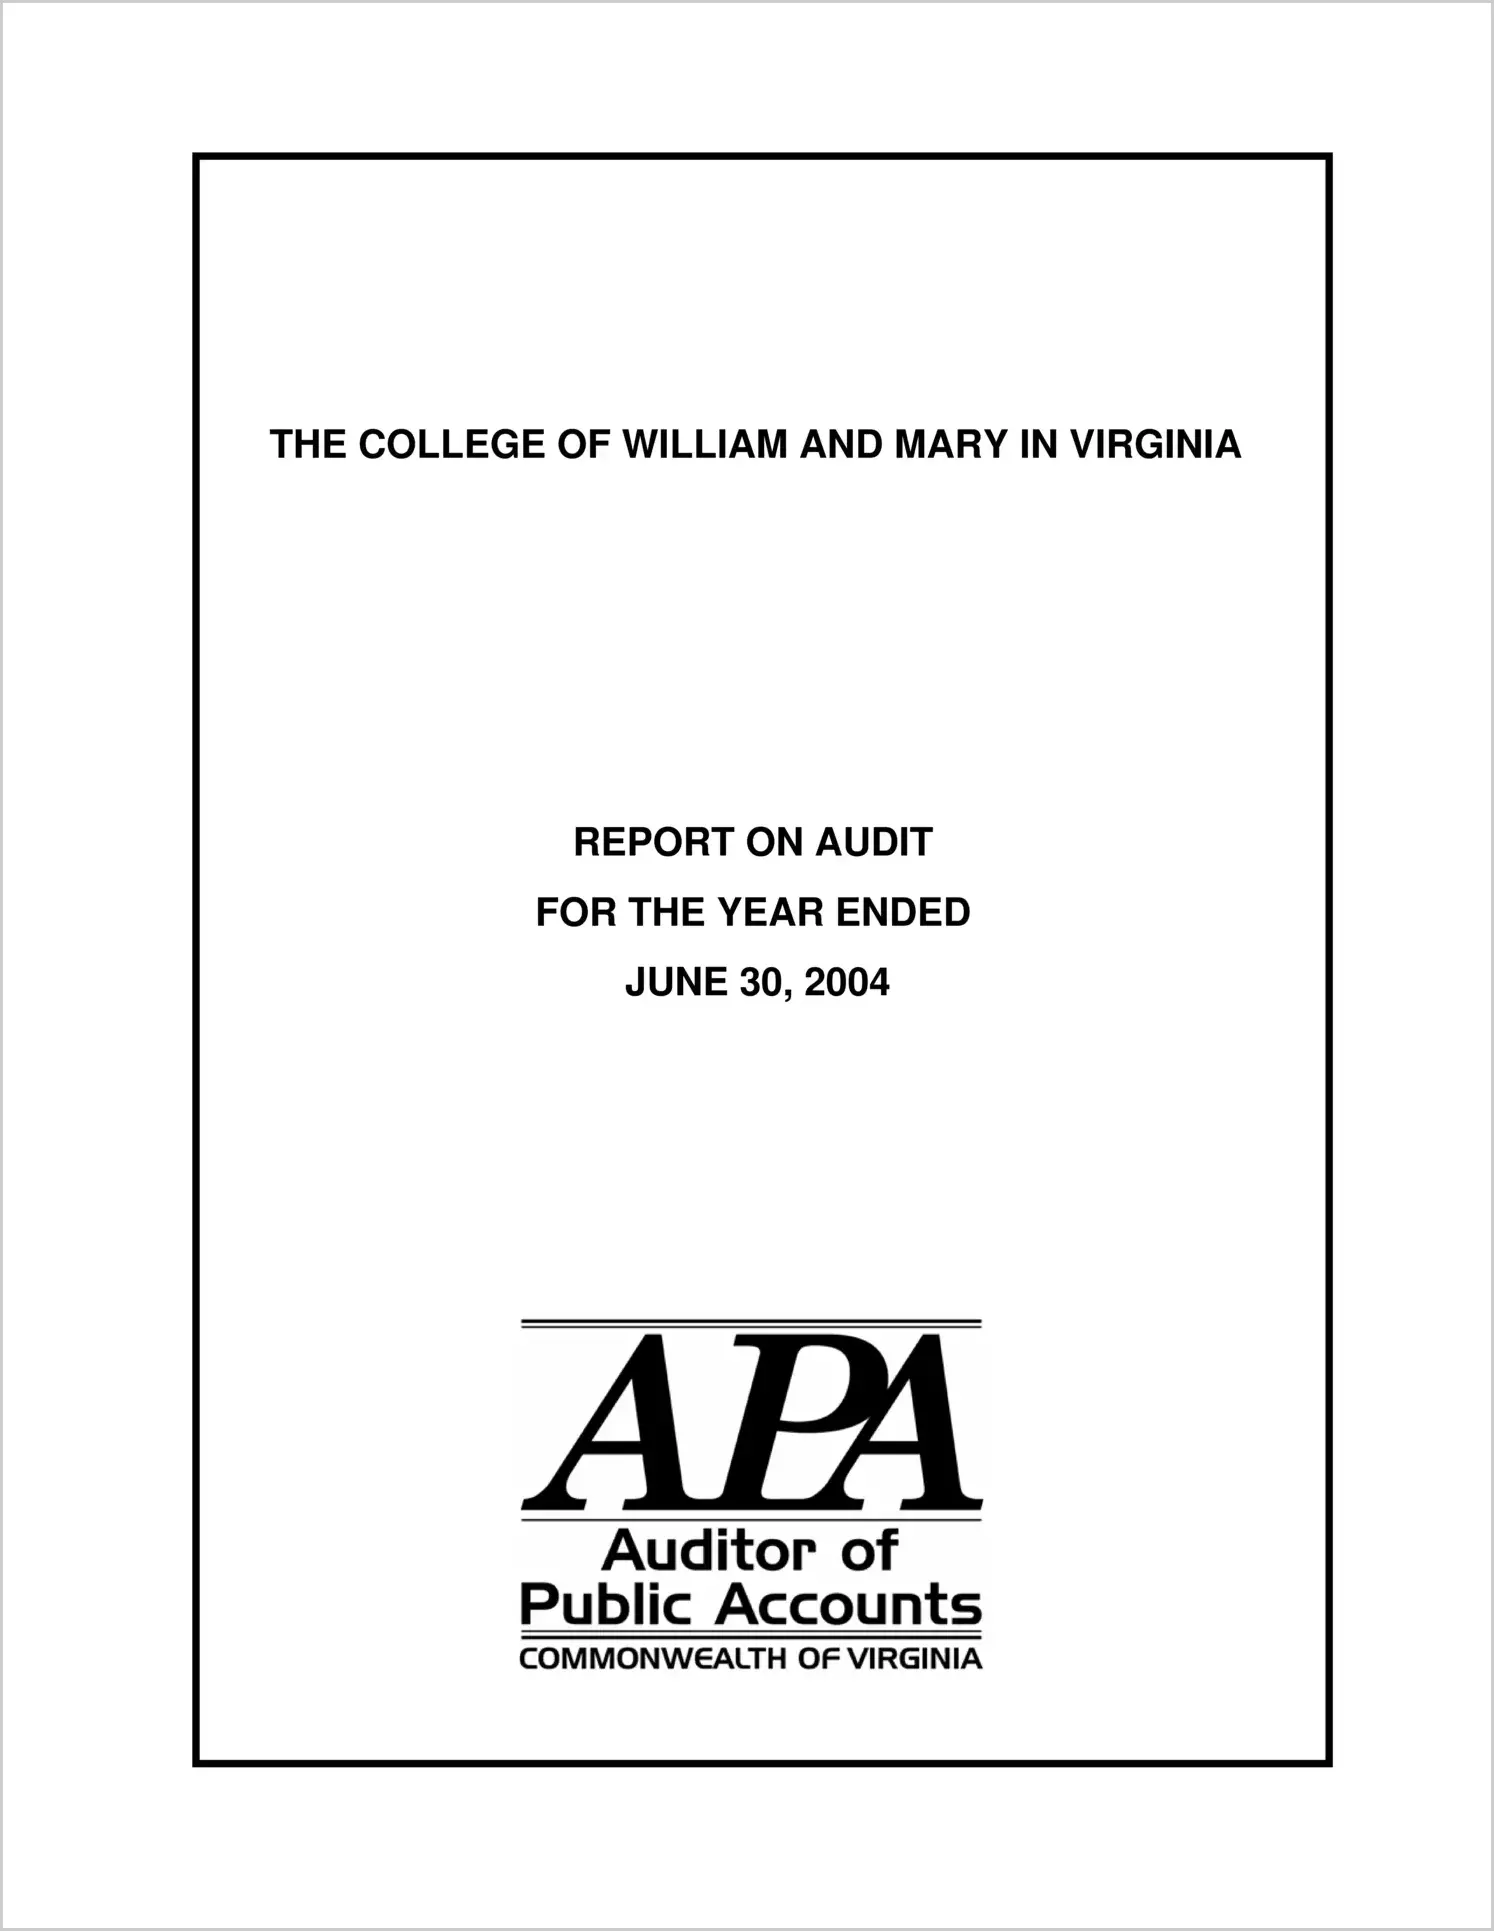 The College of William and Mary for the year ended June 30, 2004